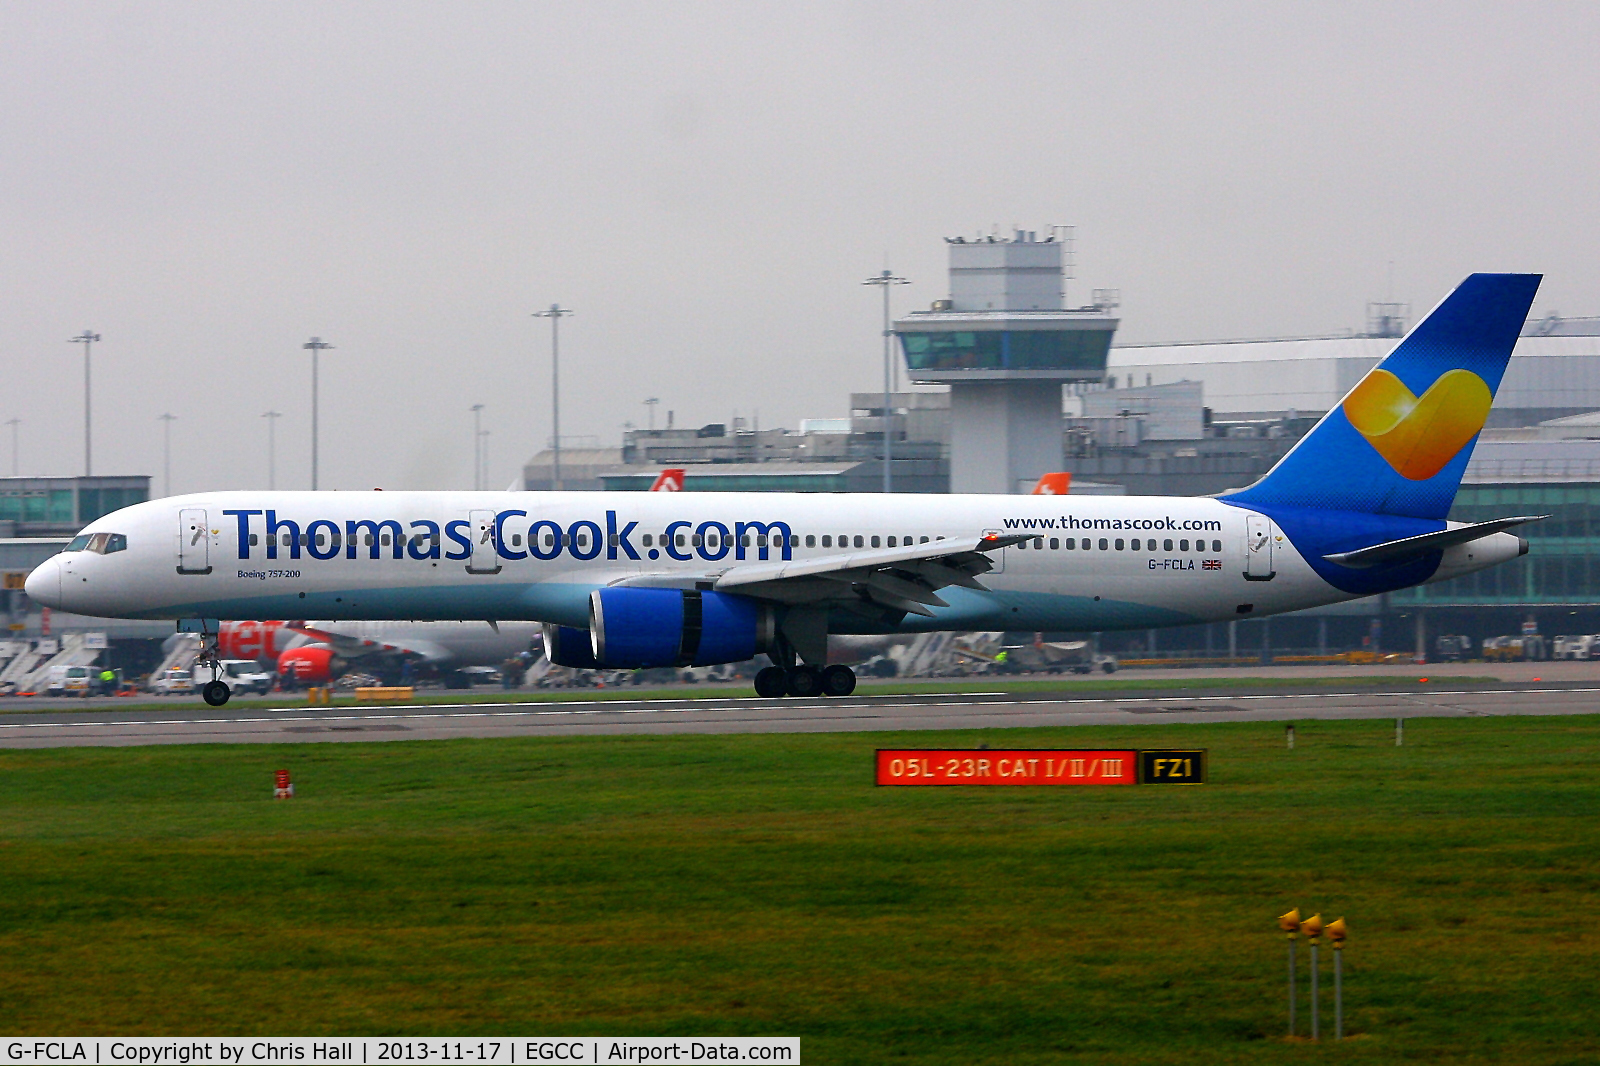 G-FCLA, 1997 Boeing 757-28A C/N 27621, Thomas Cook's new 